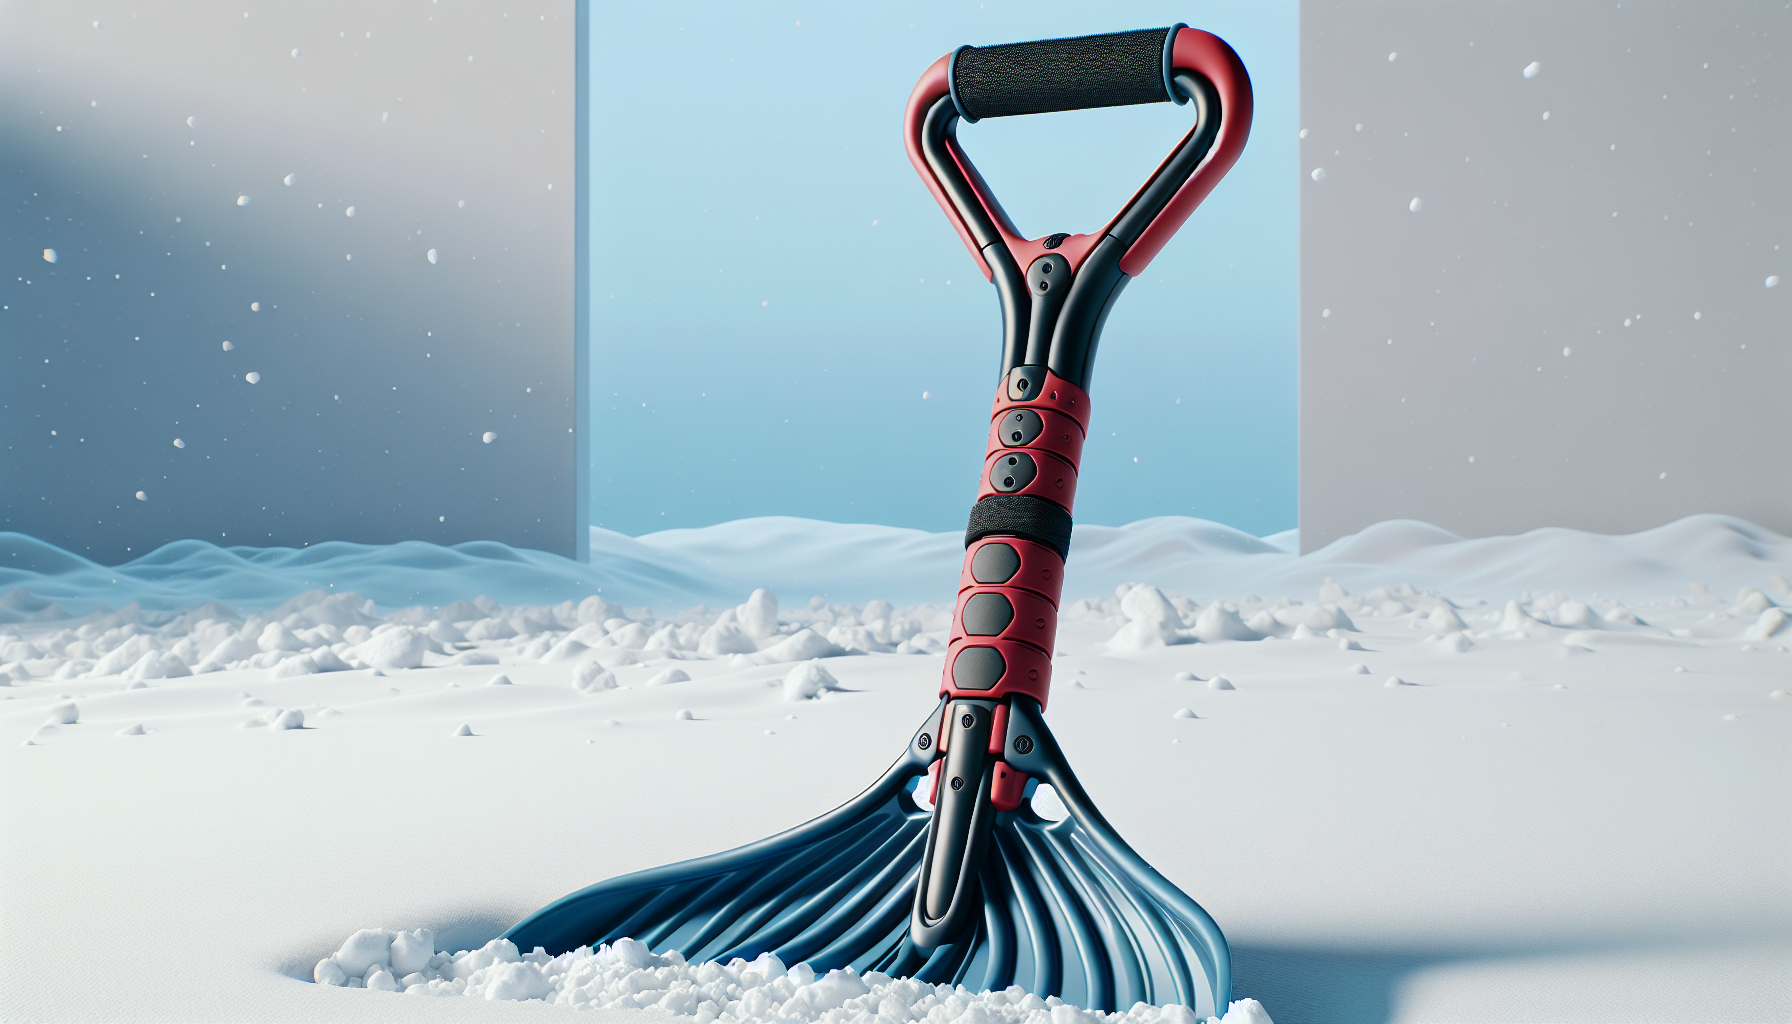 An ergonomic snow shovel with curved handle